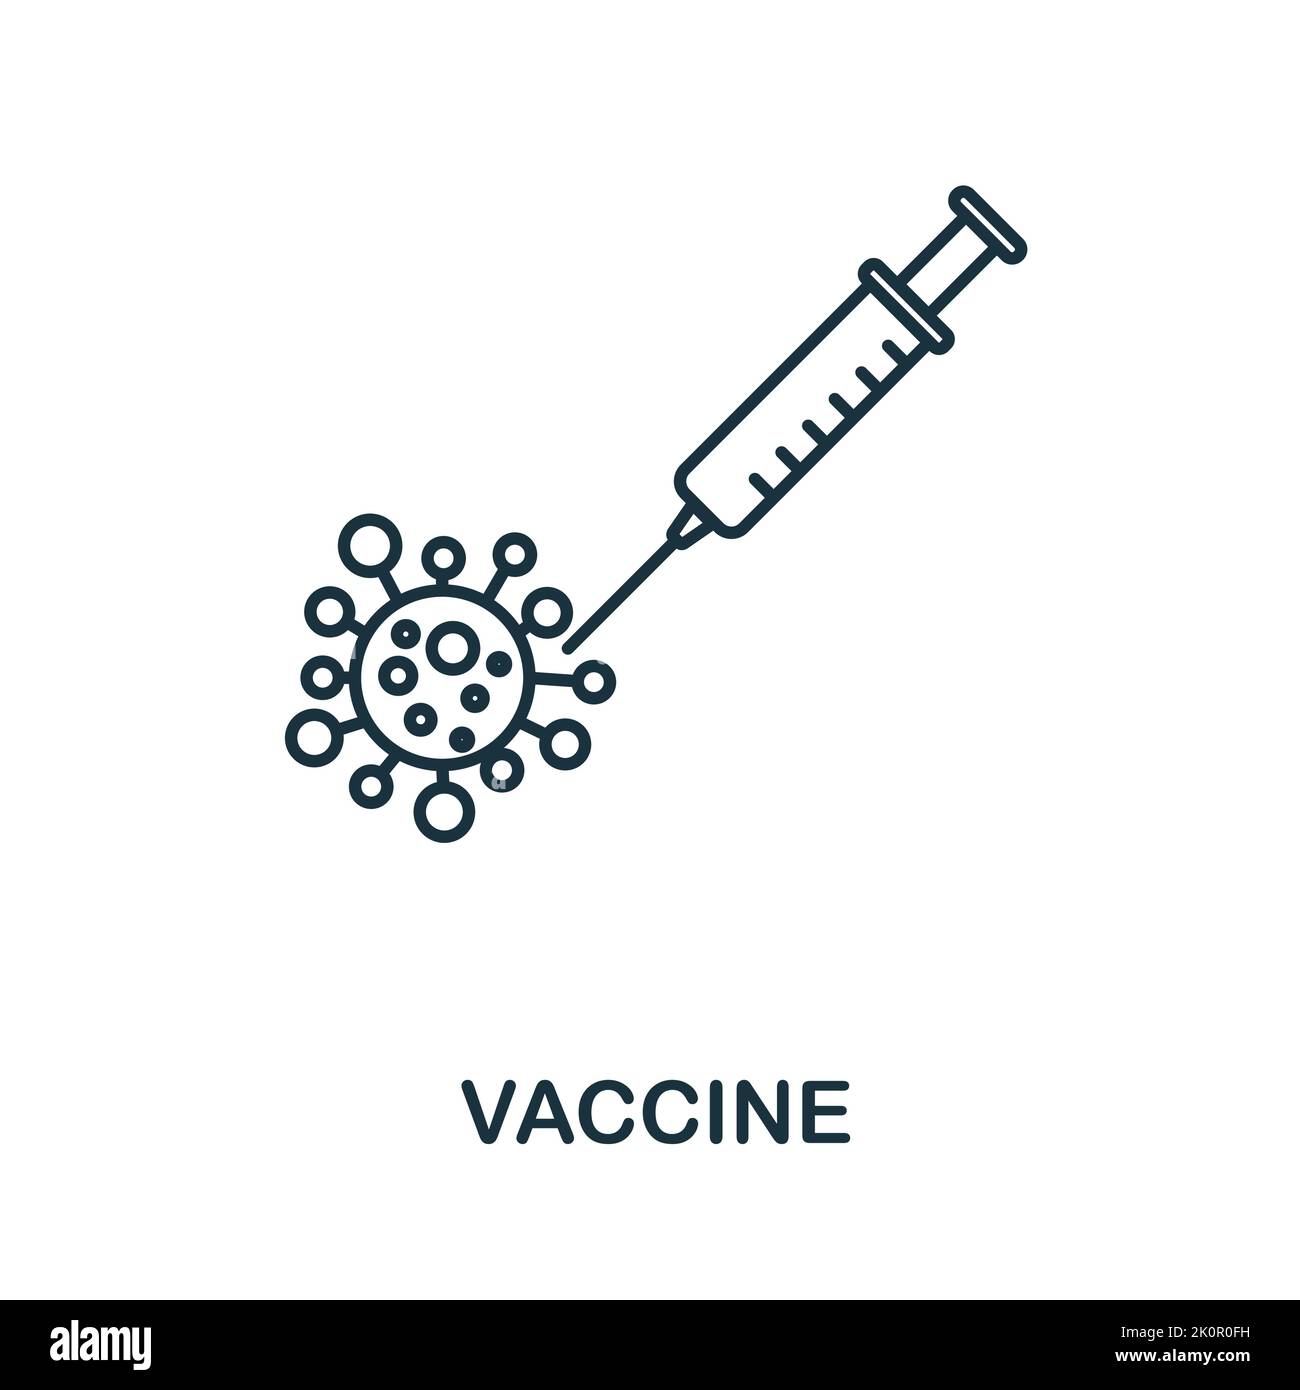 Vaccine icon. Monocrome element from medical services collection. Vaccine icon for banners, infographics and templates. Stock Vector